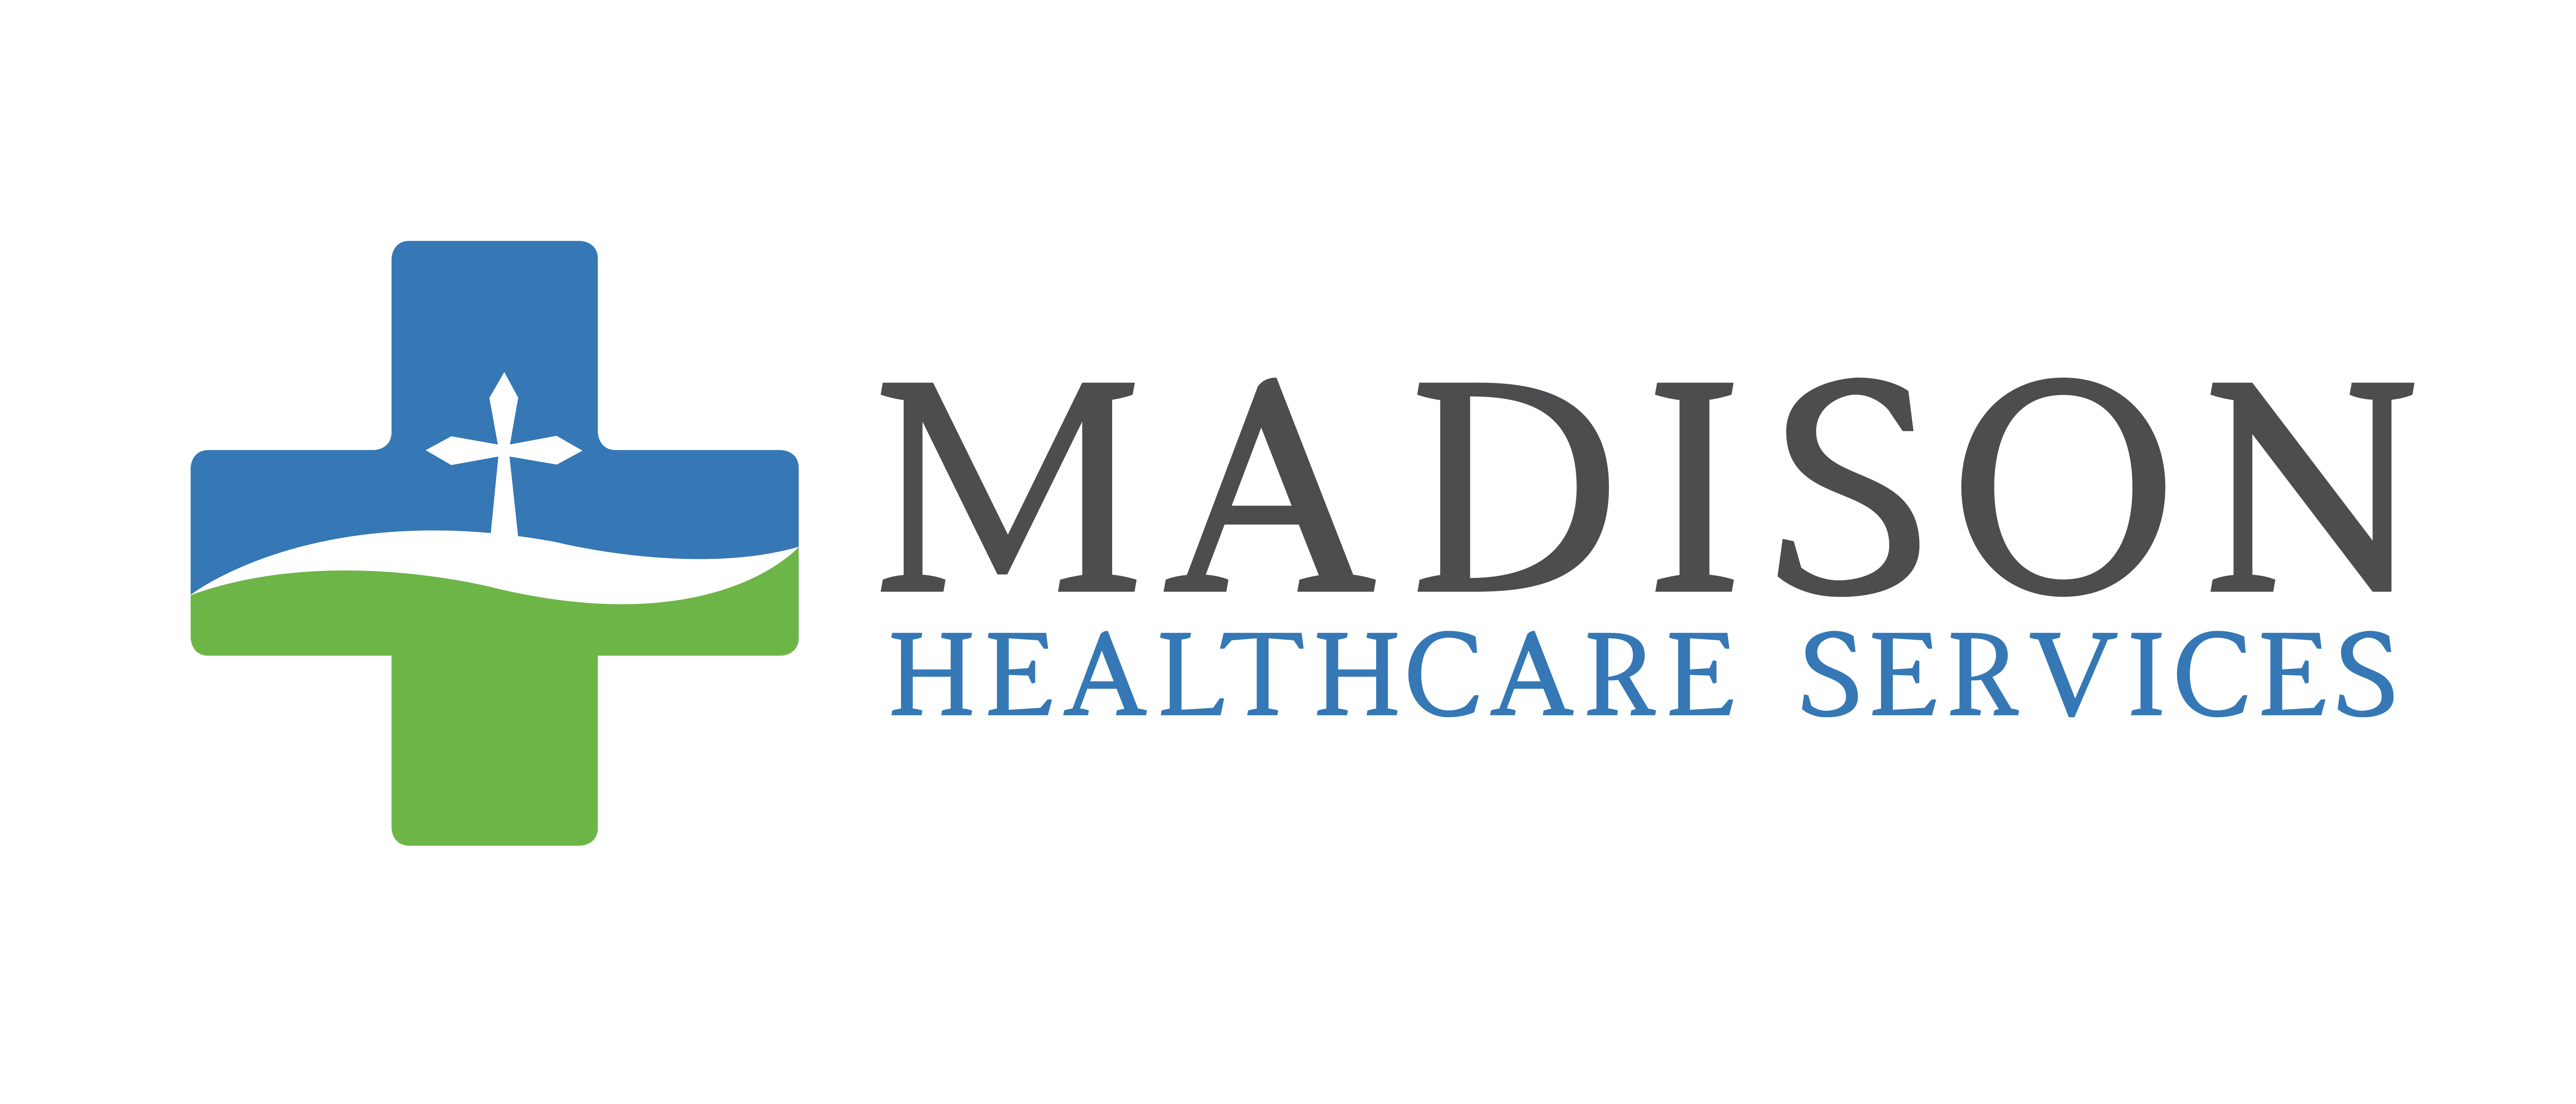 Madison healthcare services